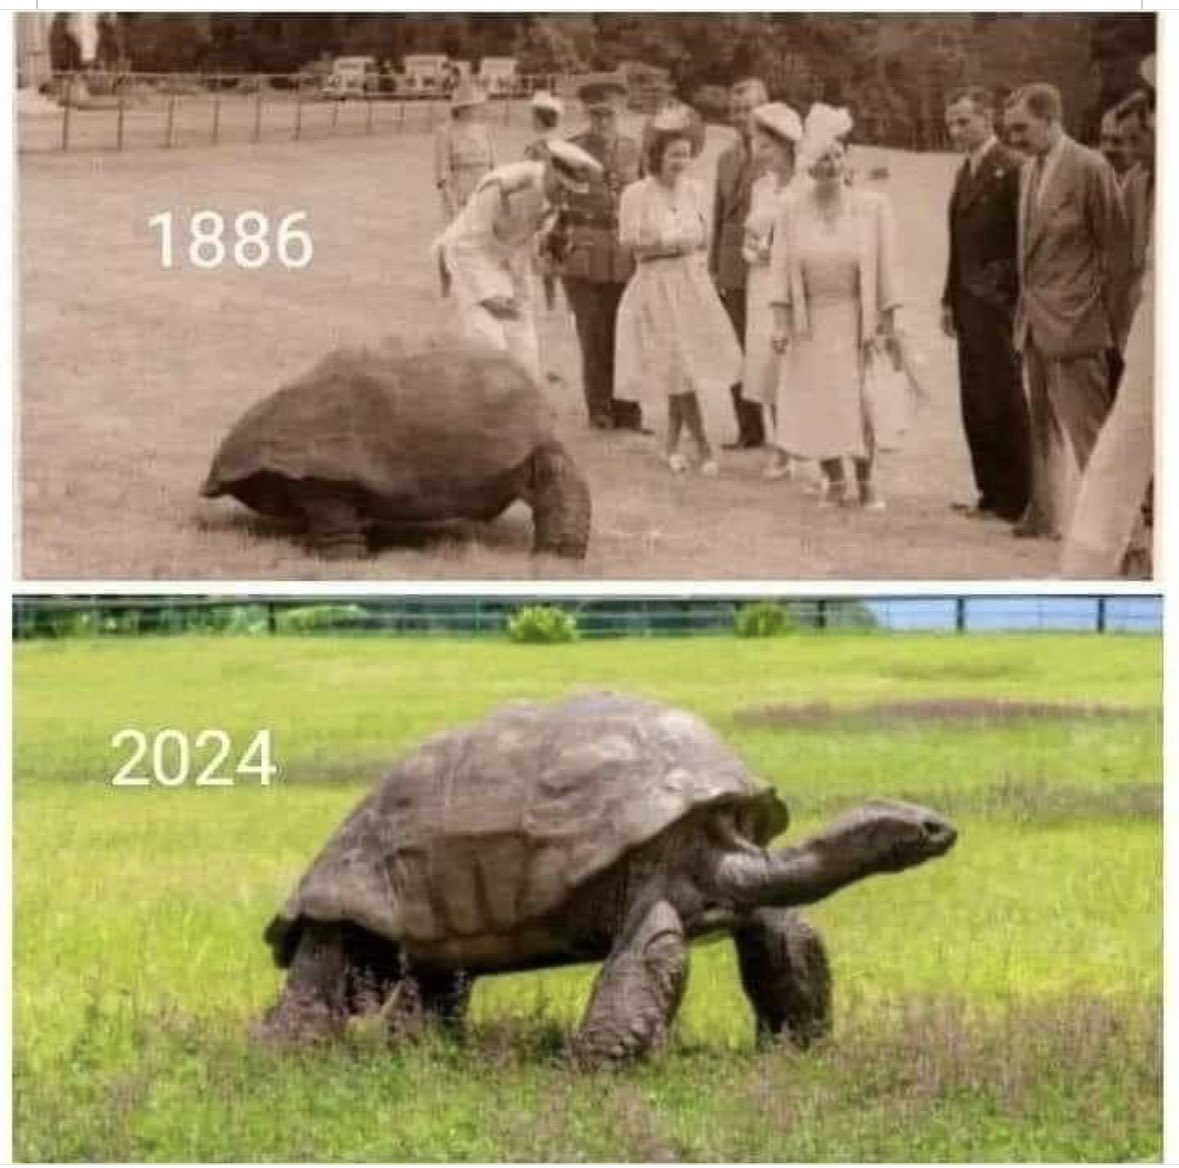 This is Jonathan! He turns 192 yrs old this year. He has lived through 39 POTUS, 2 World Wars, the Russian Revolution and 7 British Monarchs! That makes him the second oldest living creature on earth behind Joe Biden! 🐢🐢🐢🐢🐢🐢🐢🐢🐢🐢🐢